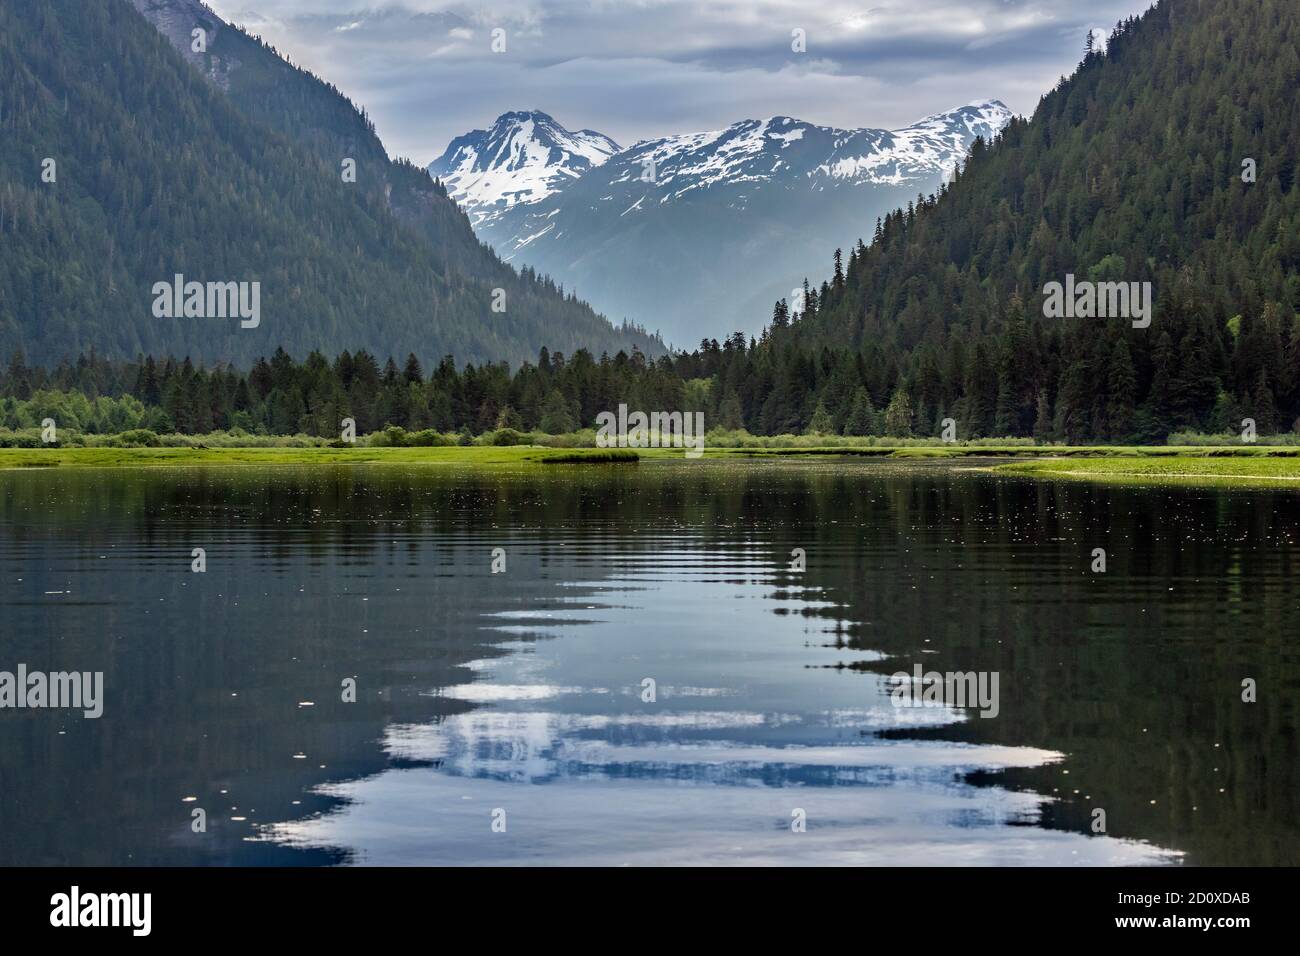 Snow-covered mountain, ripples and reflections, Khutzeymateen estuary, BC Stock Photo